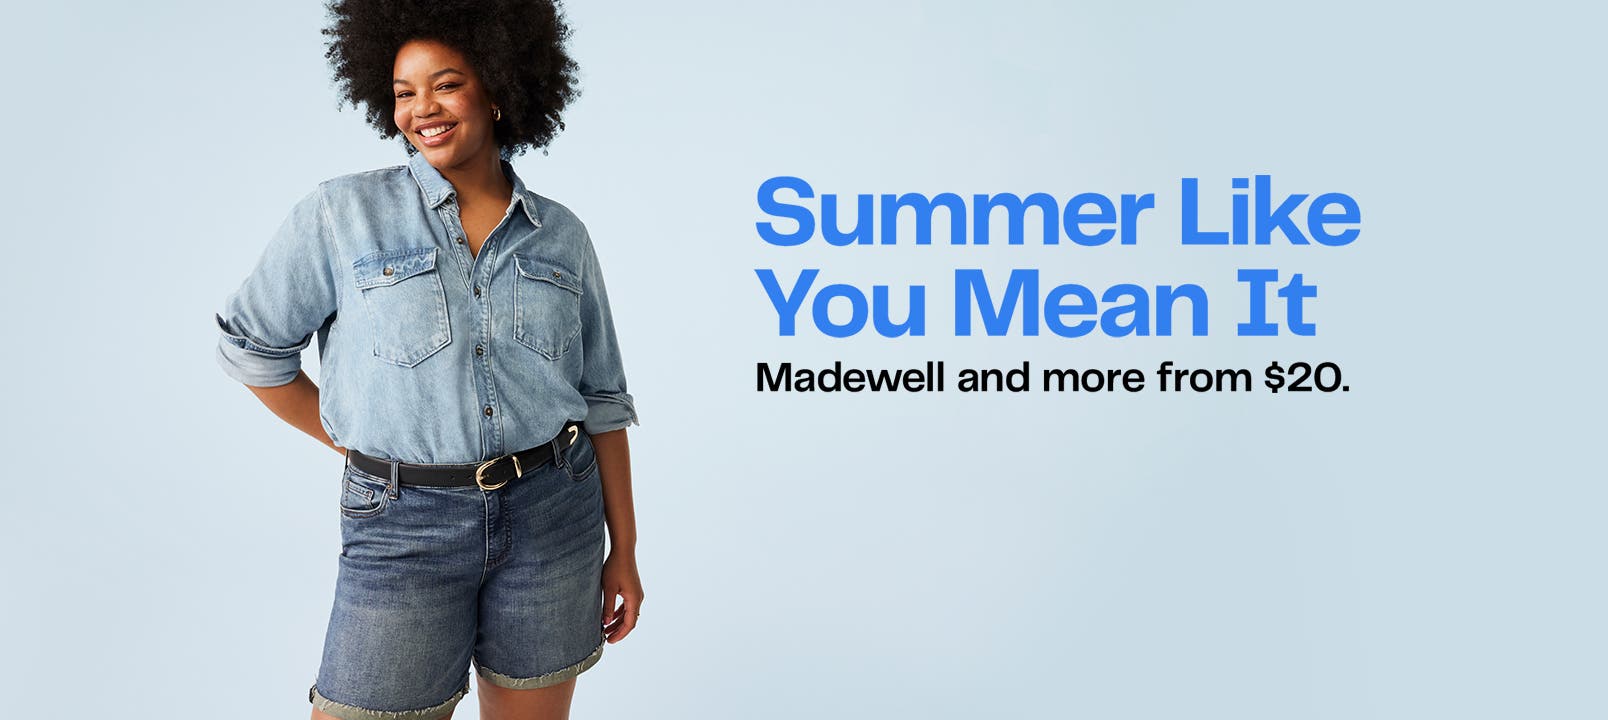 Casual summer styles for women and men.